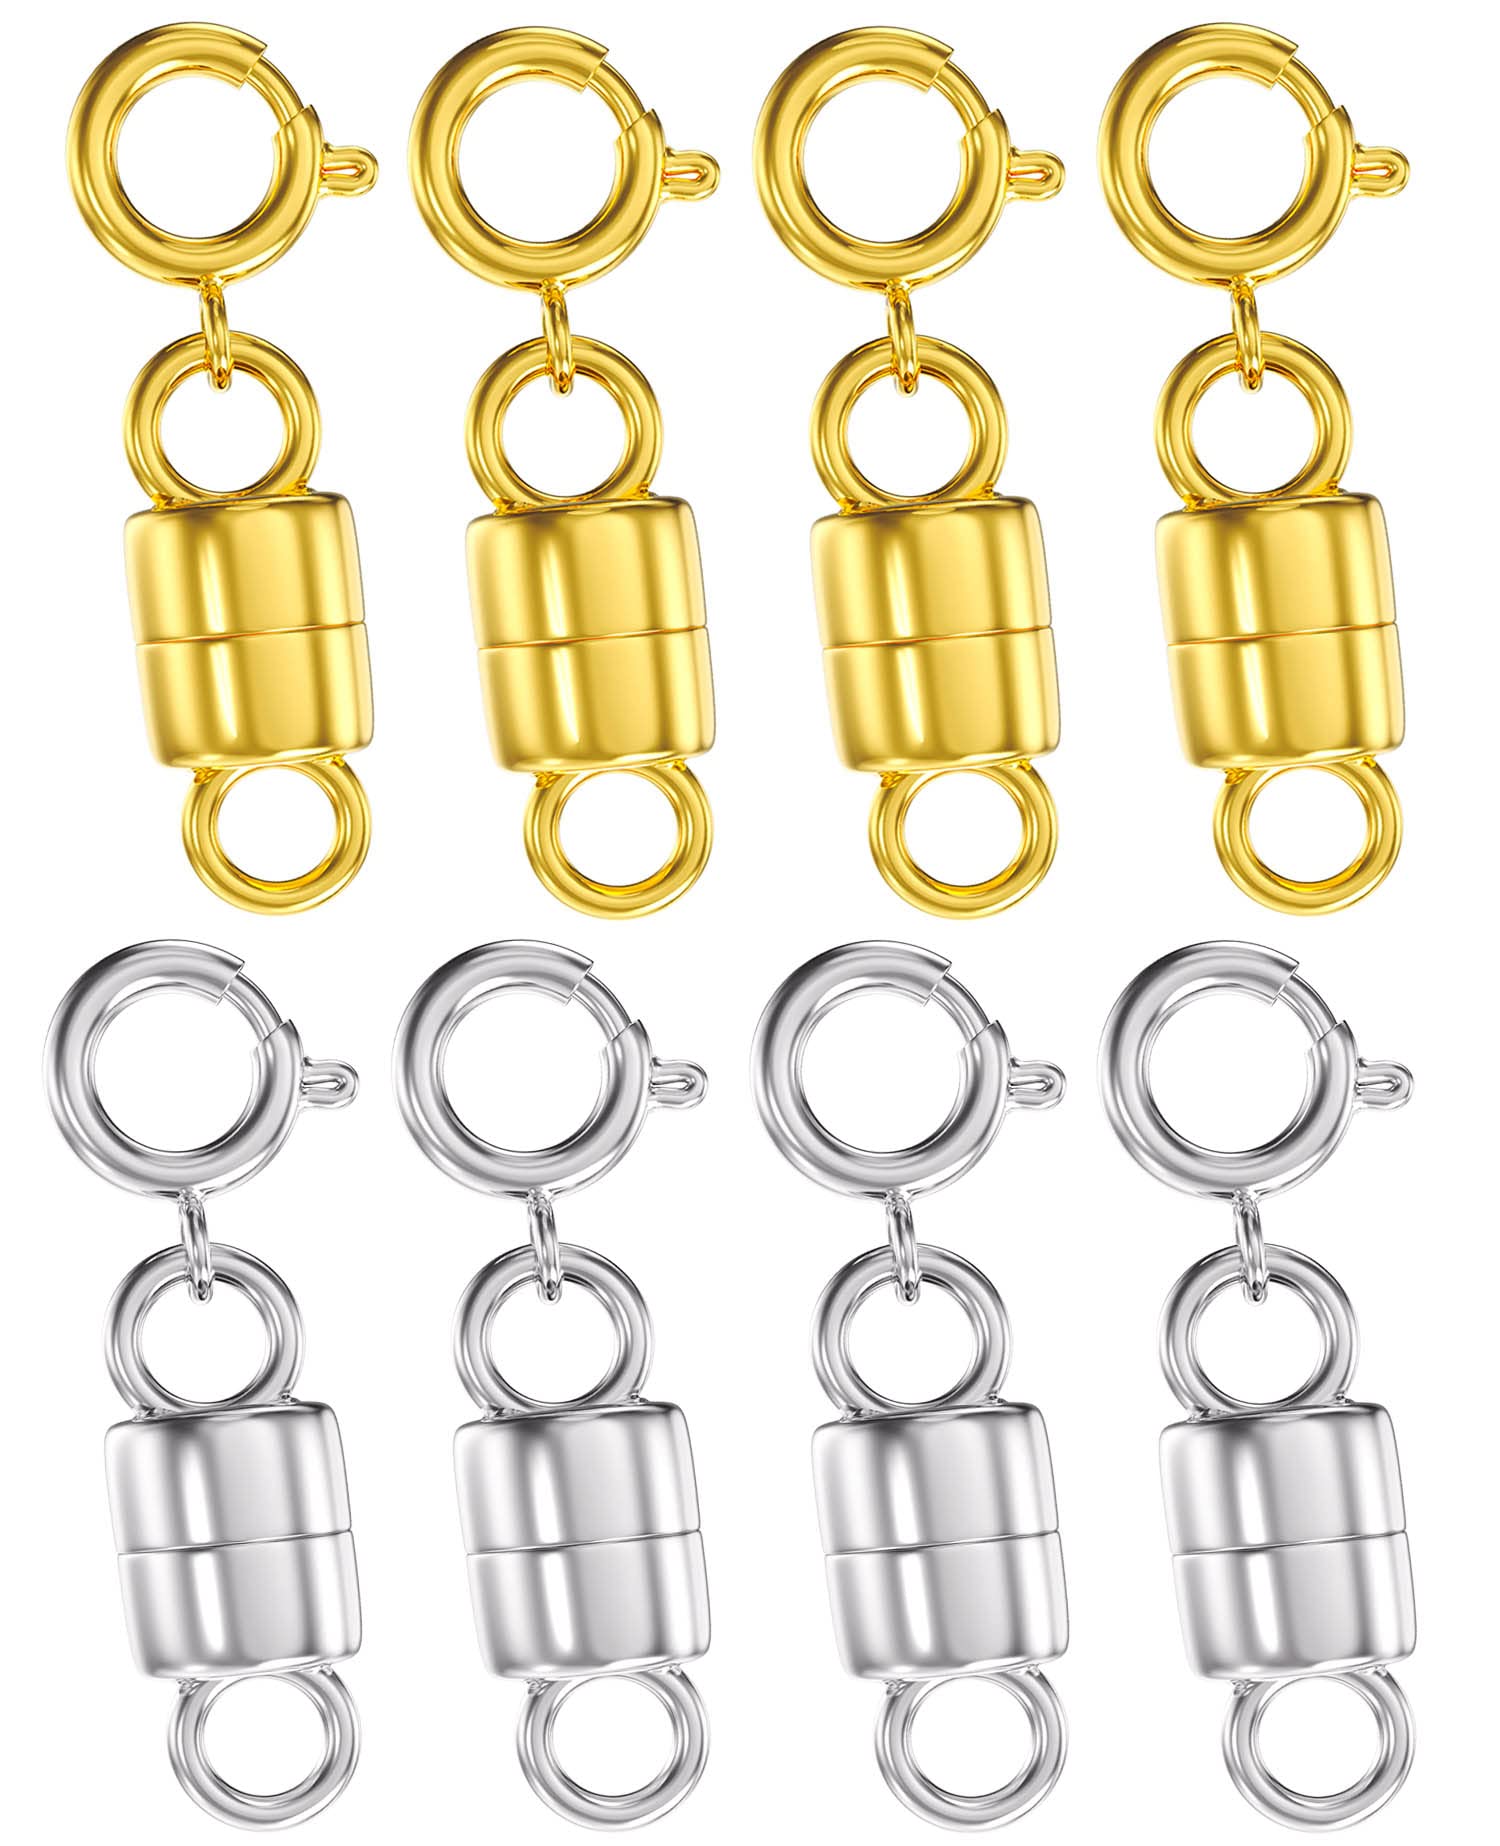 Magnetic Necklace Clasps And Closures Magnetic Jewelry Clasps Connector  Locking Magnetic Jewelry Clasp Converters For Jewelry Bracelet Necklace  Making